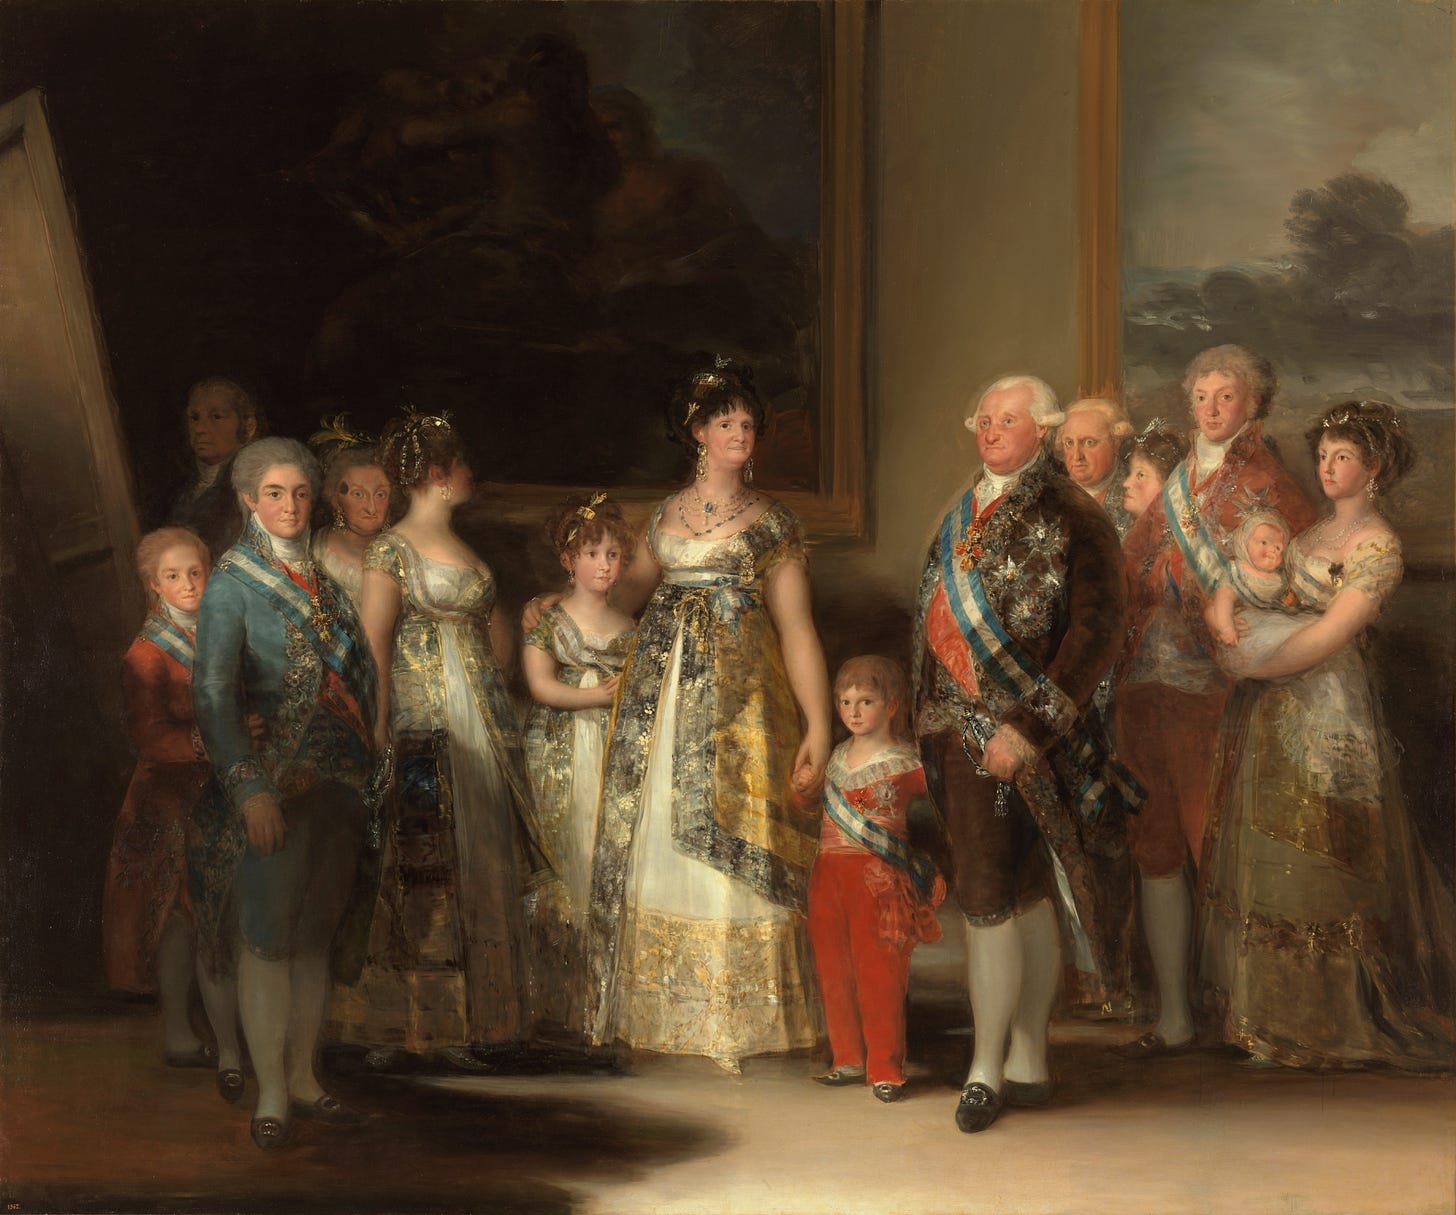 fun fact: the woman looking away was "the wife of ferdinand vii", who wasn't married yet